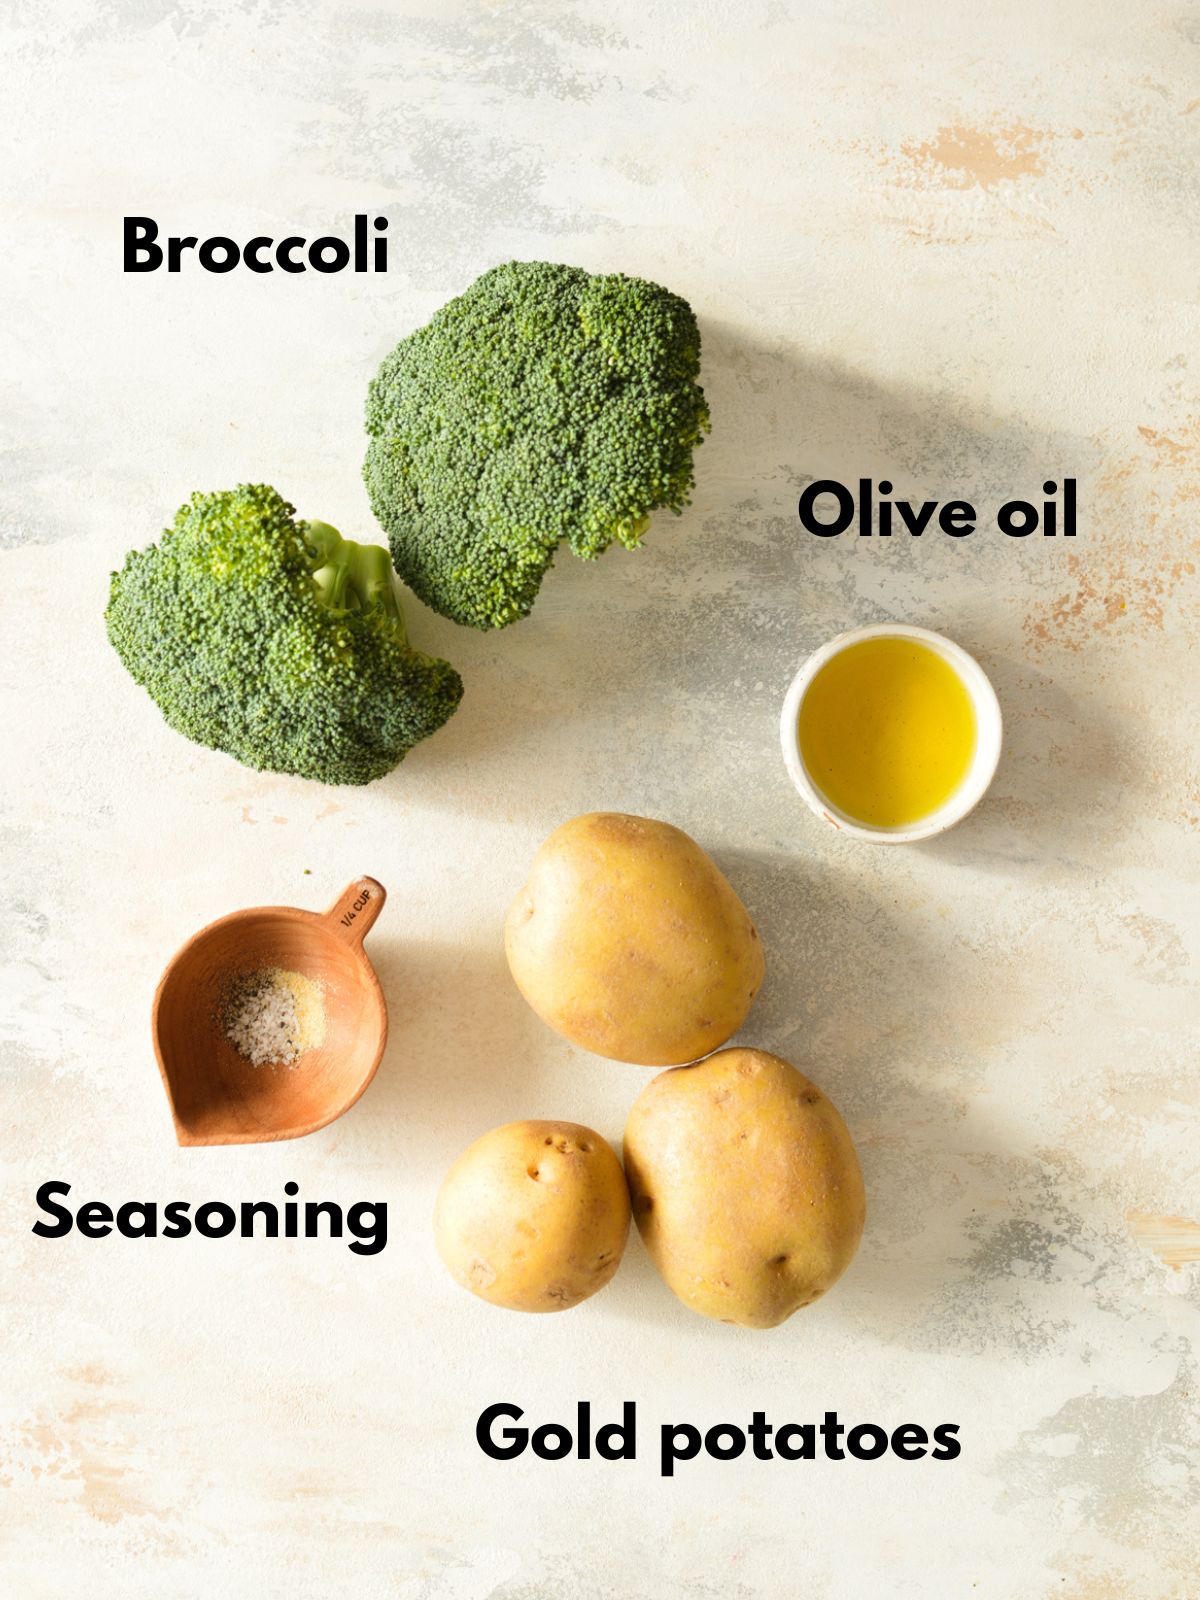 ingredients for roasted broccoli and potatoes